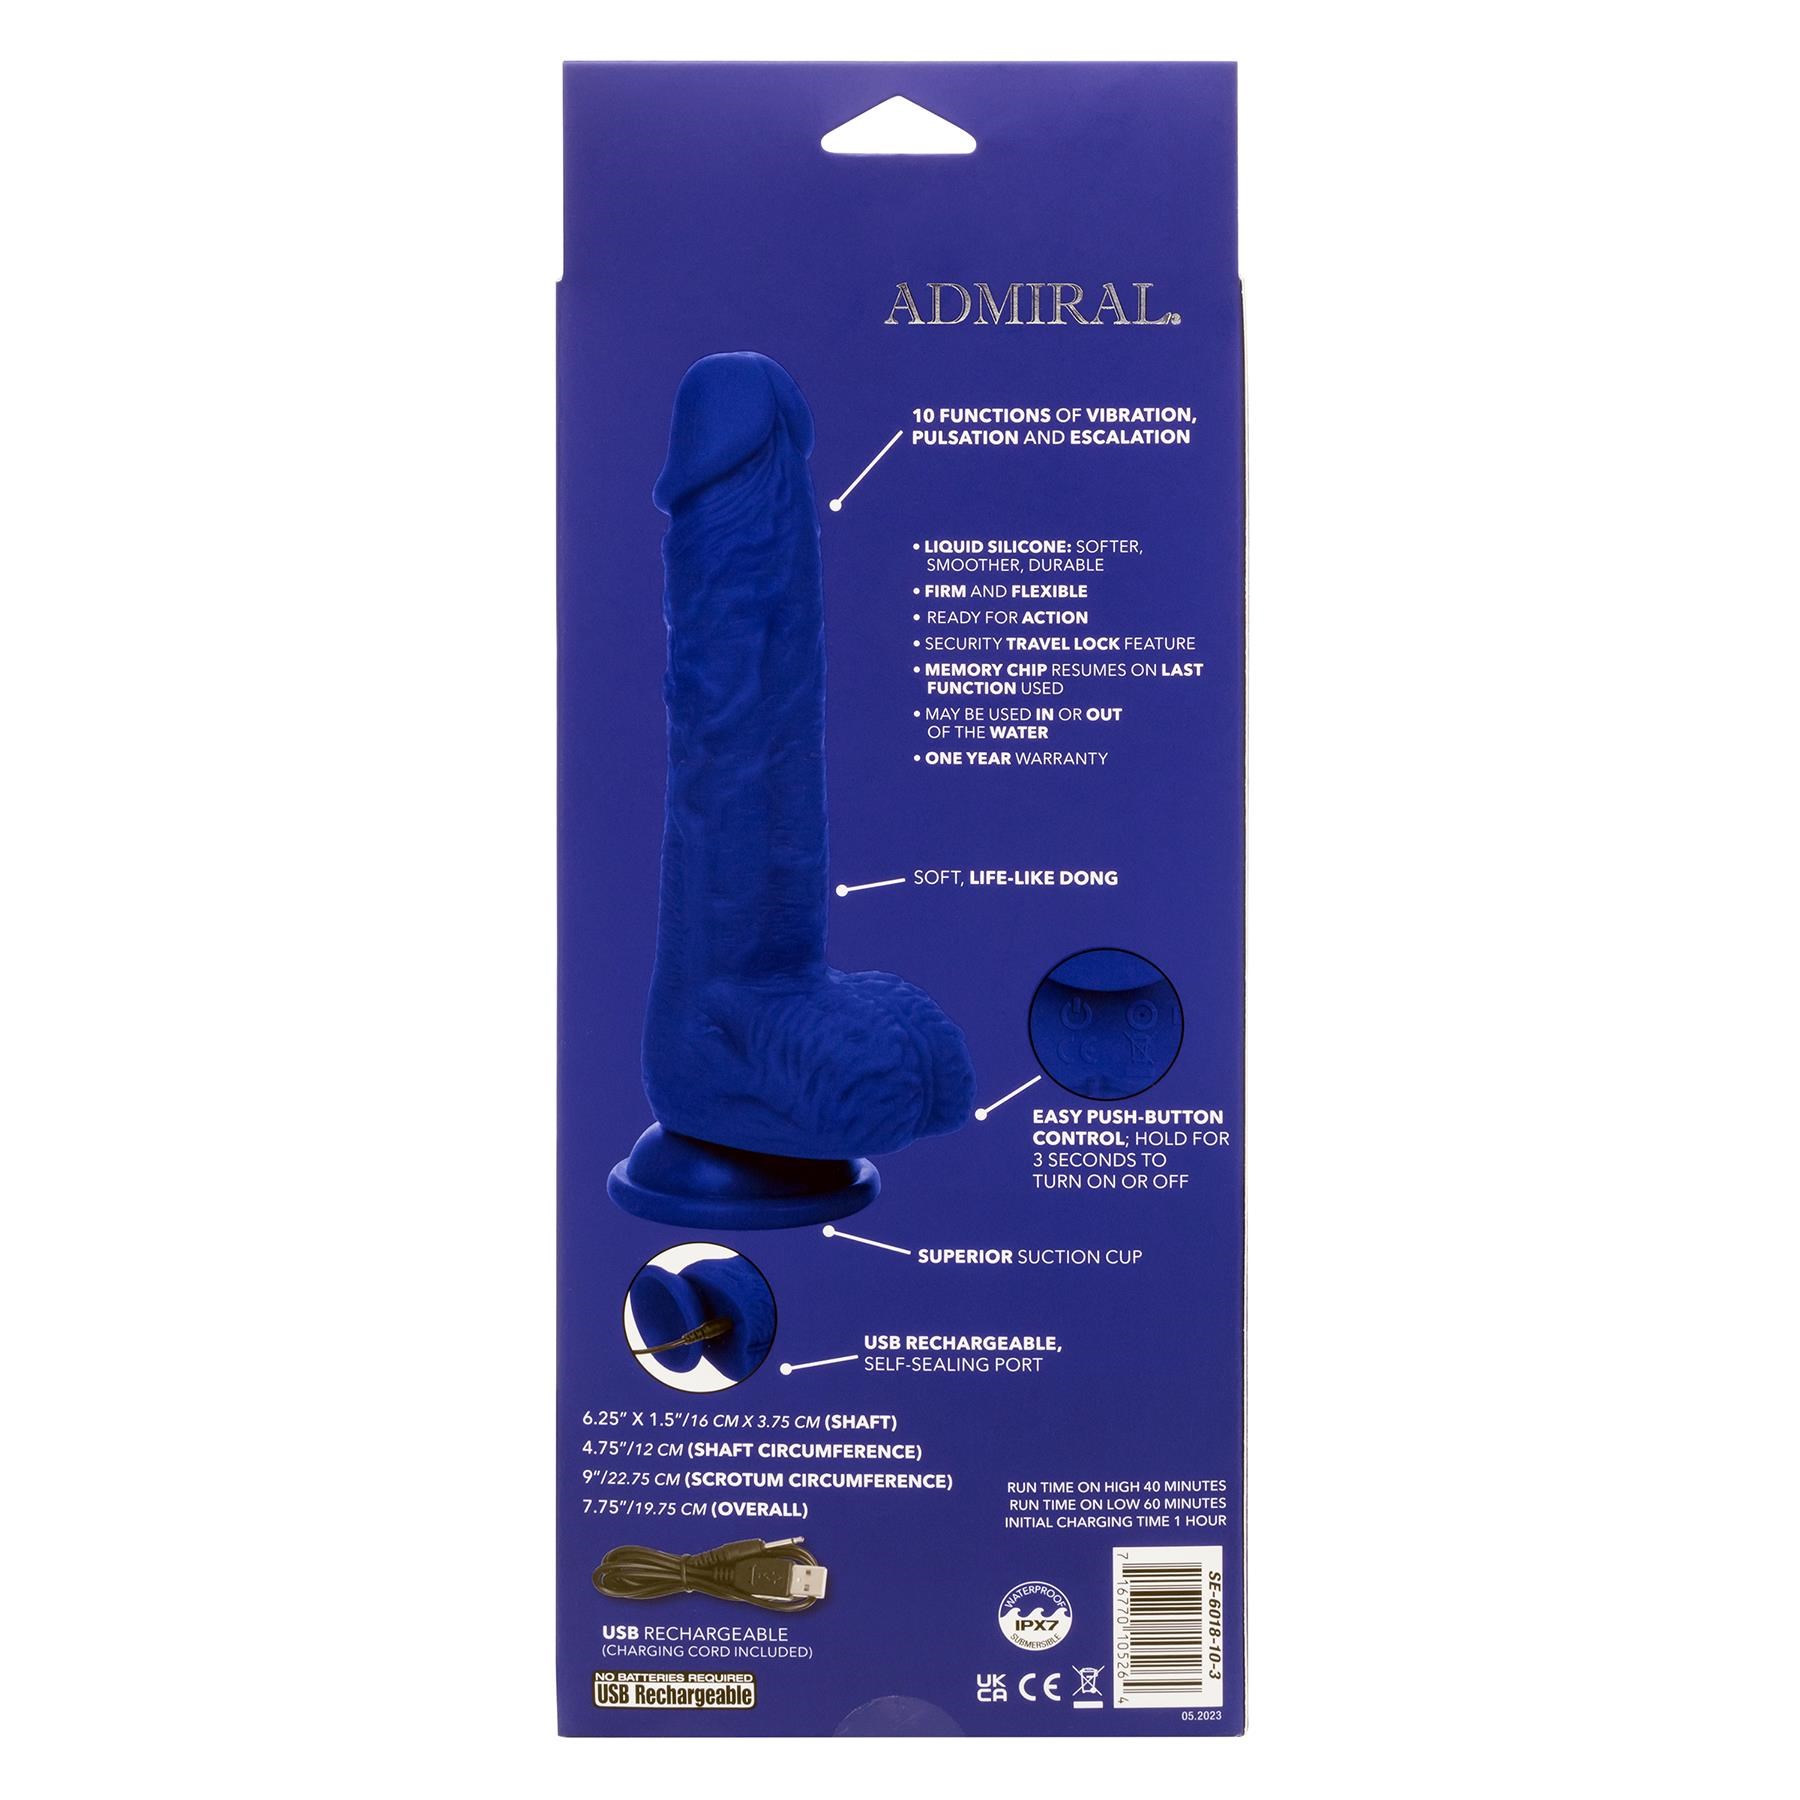 Admiral 7 Inch Vibrating Sailor Dildo - Packaging - Back